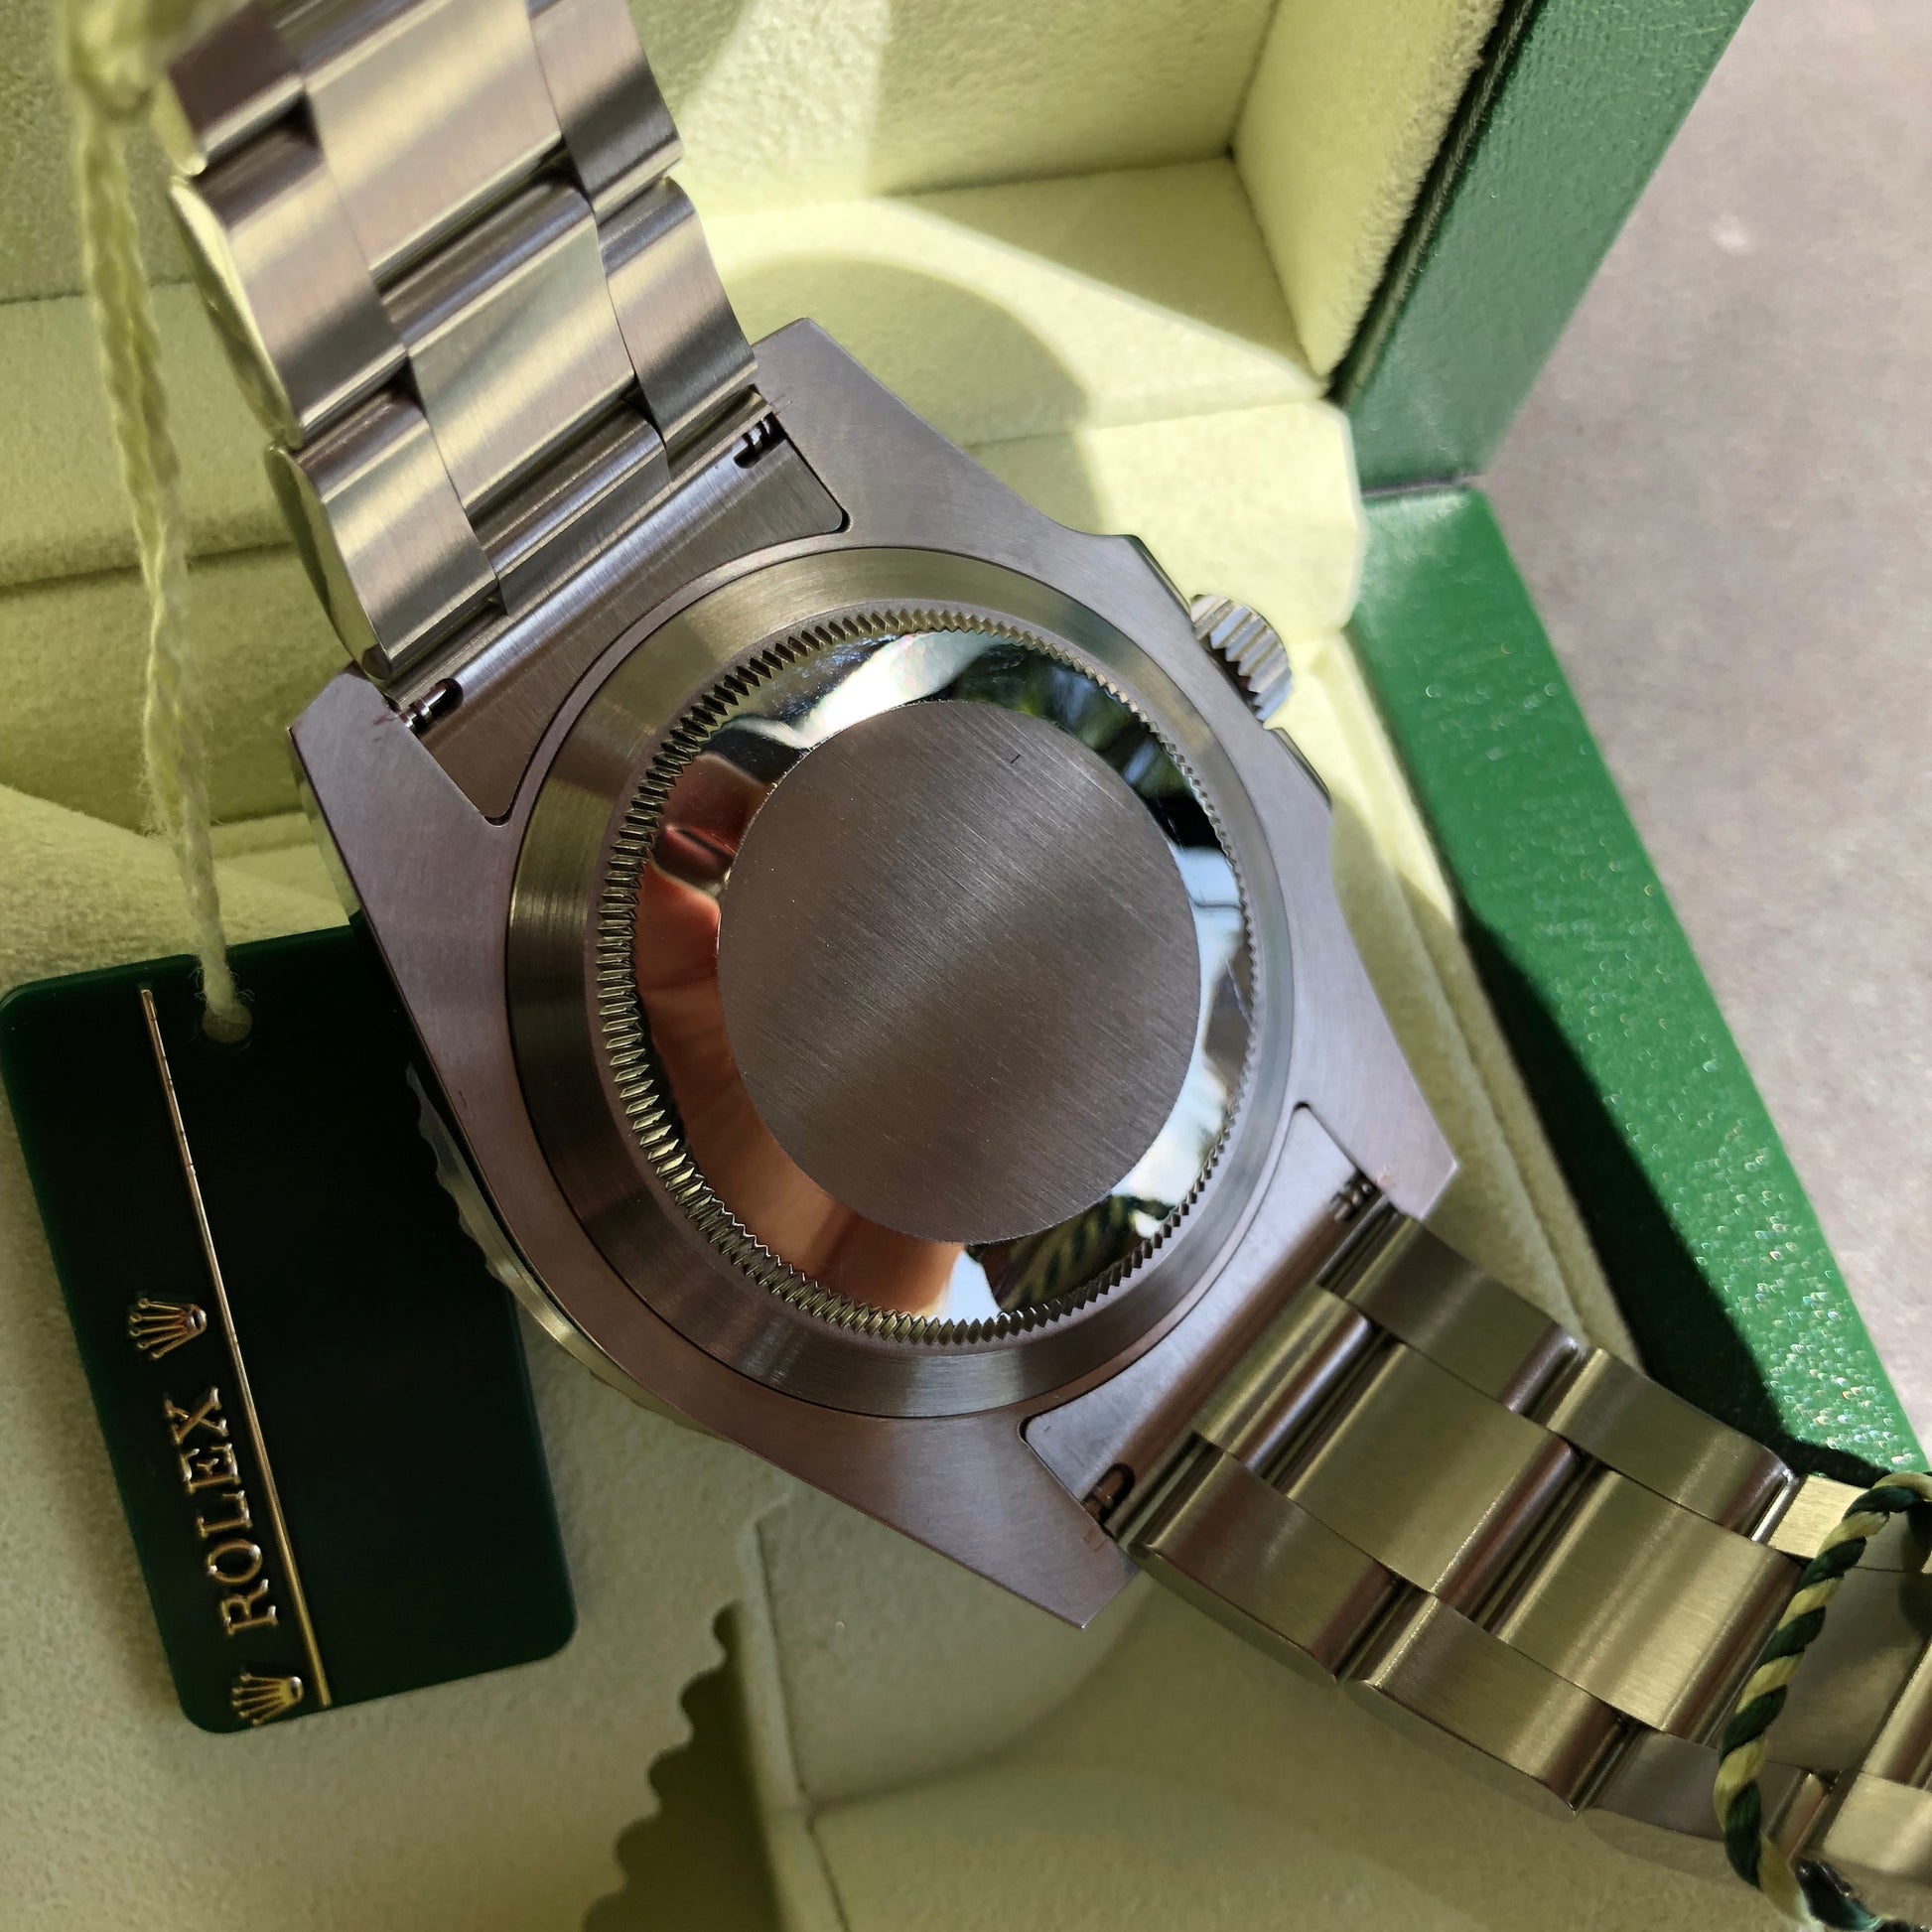 Rolex Submariner Date 116610 LN Stainless Steel Ceramic Wristwatch Box & Papers - Hashtag Watch Company